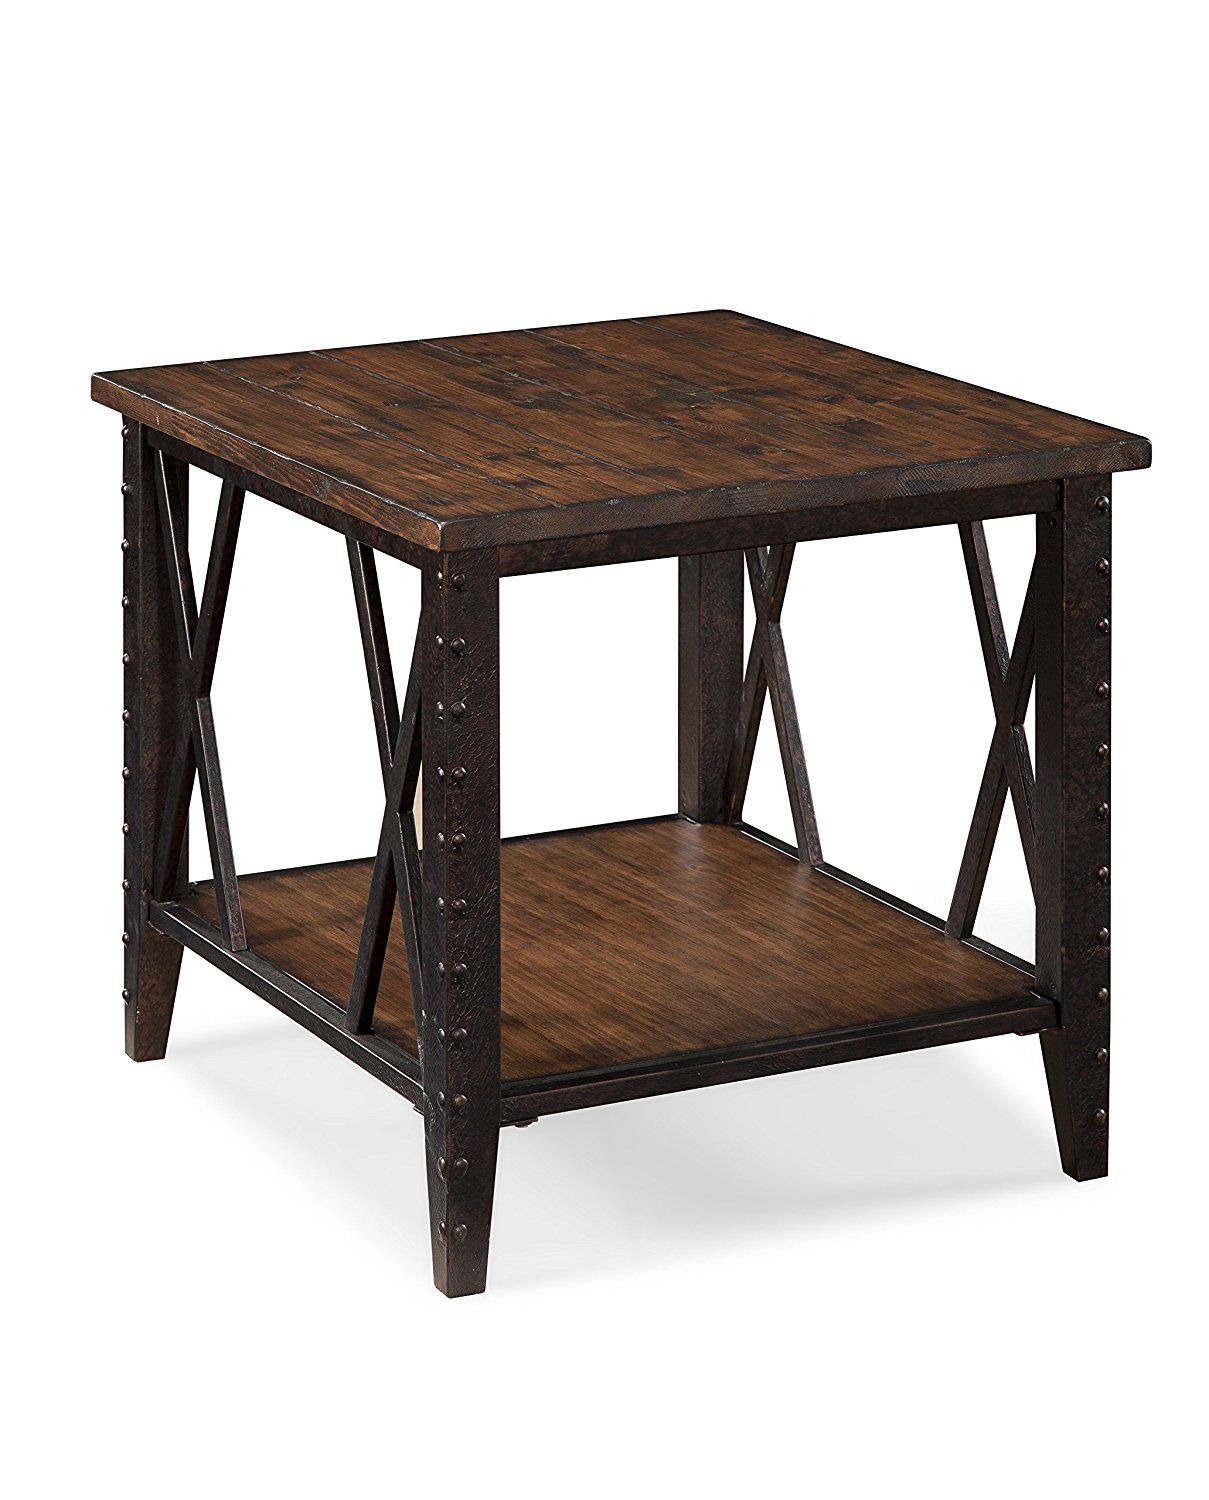 Rectangular End Table Wood And Metal – Decor Ideas Intended For Wood And Steel Outdoor Side Tables (View 9 of 15)